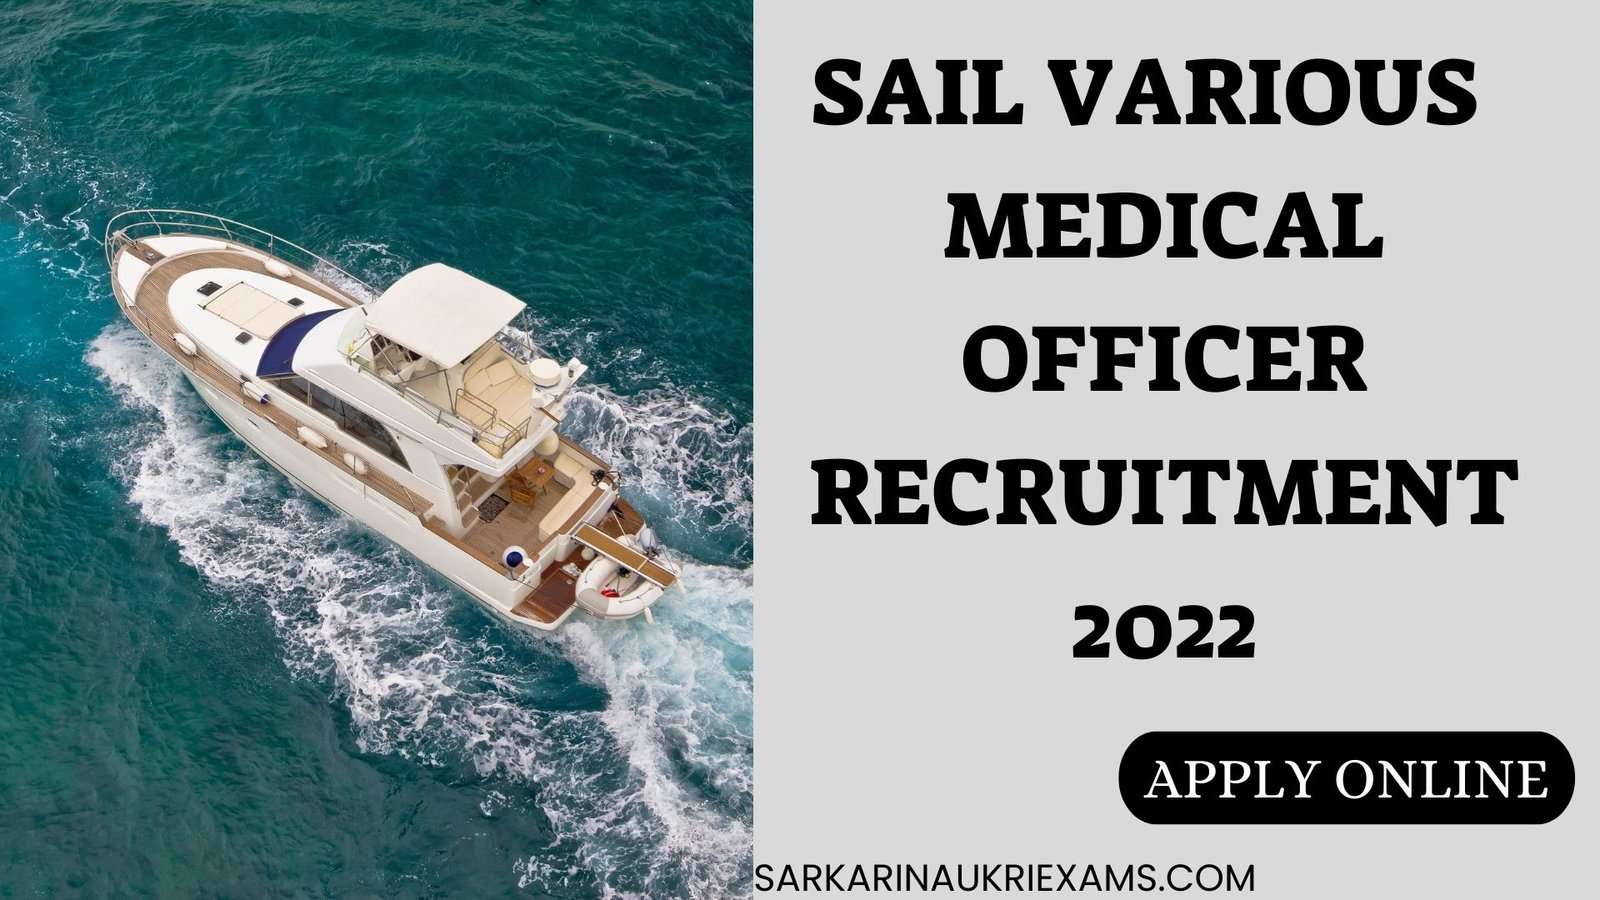 SAIL Various Medical Officer Recruitment 2022 |259 Vacancy Apply Online form